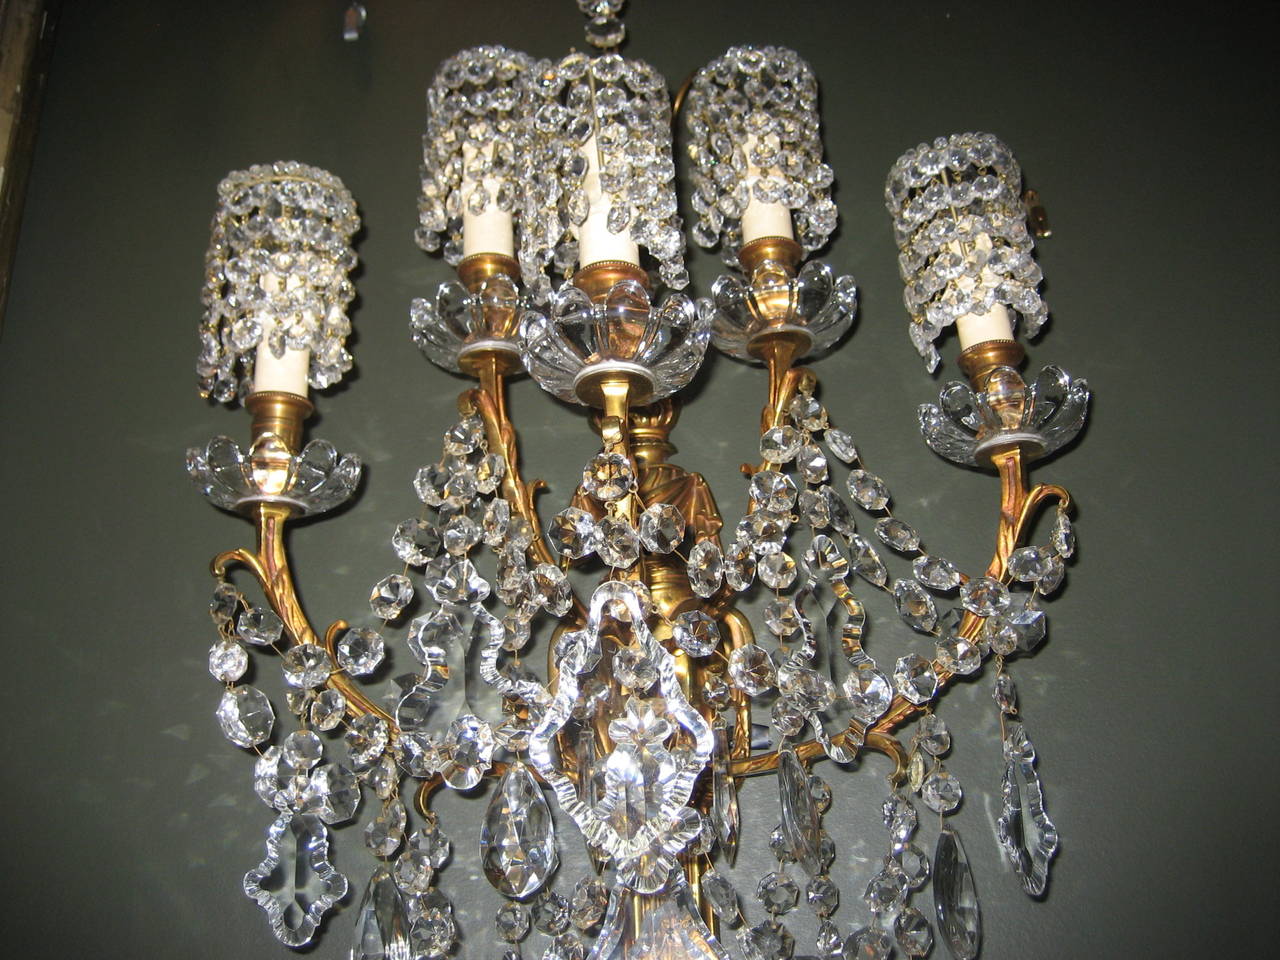 A large antique French Louis XVI style gilt bronze and cut crystal multi light wall sconce of Fine detail embellished with cut crystal chains, prisms and unusual cut crystal shades.